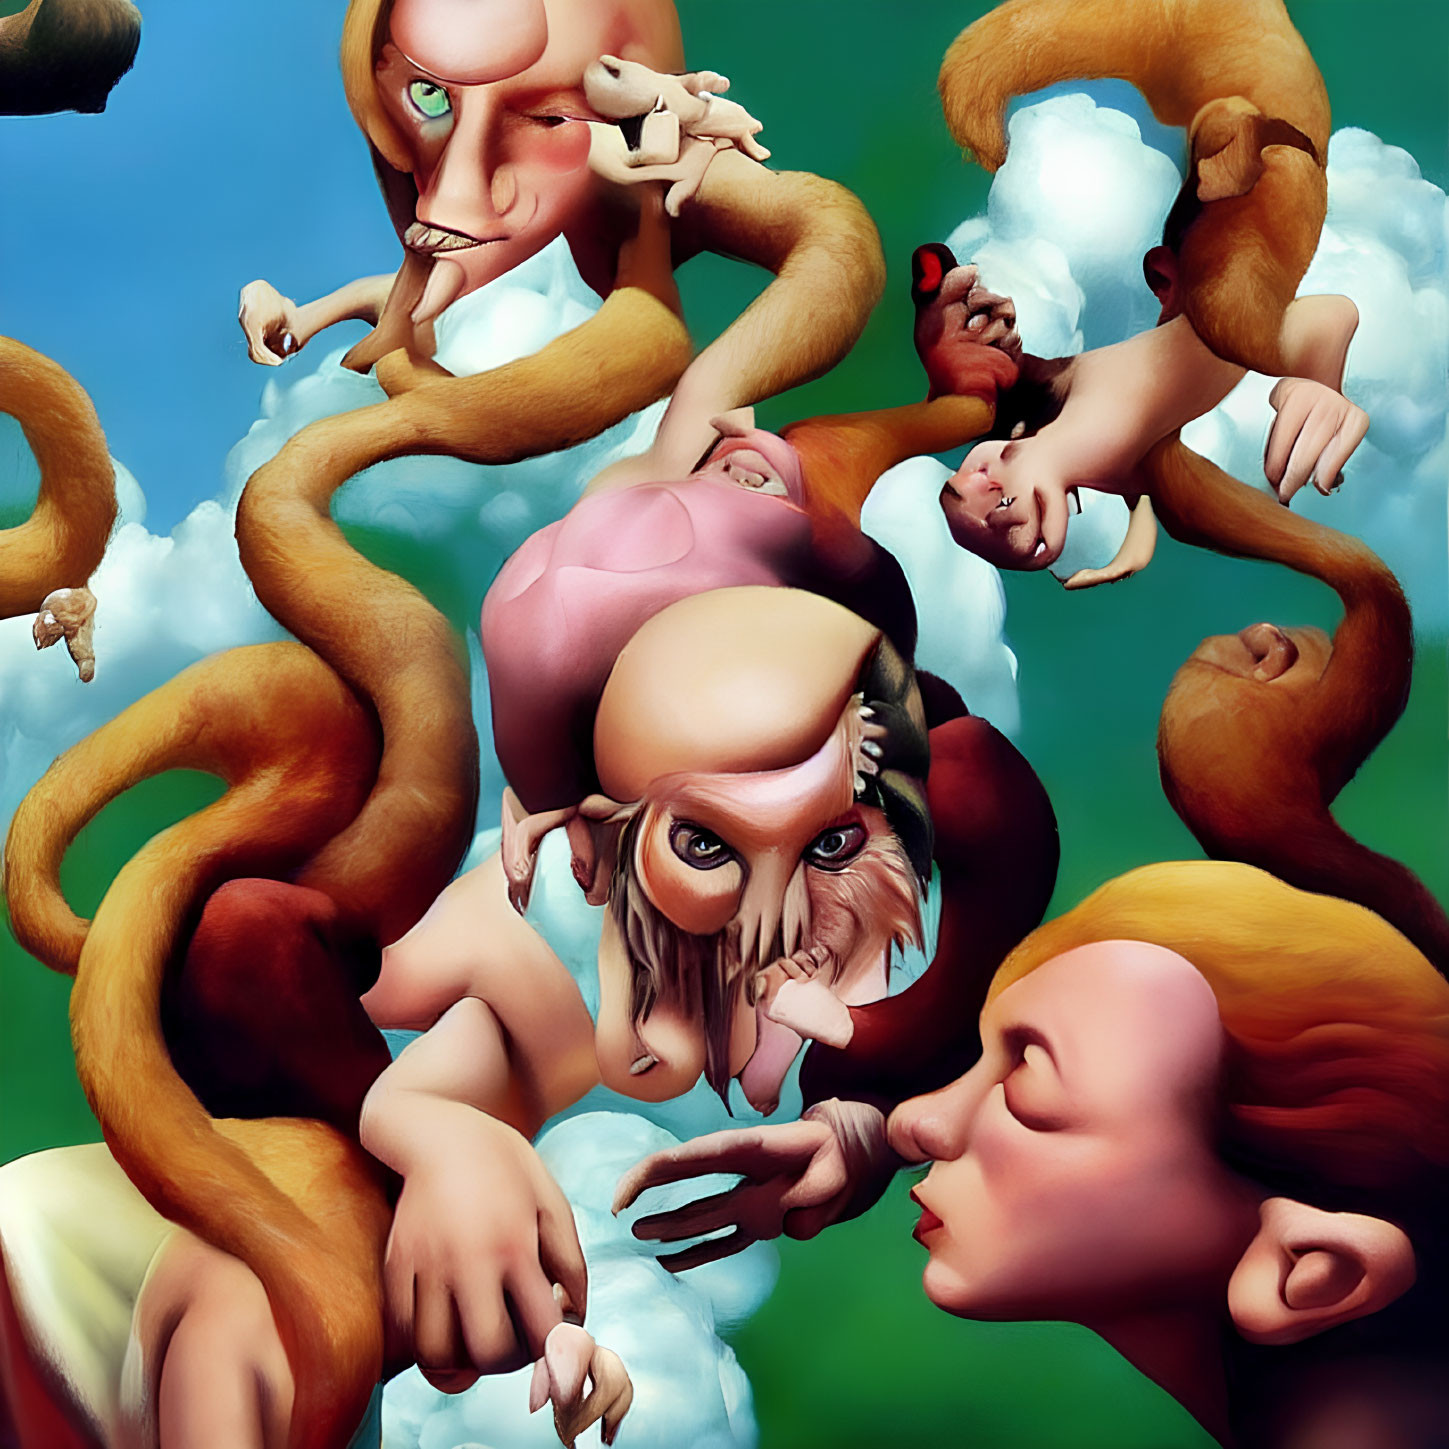 Surreal painting: Intertwined humanoid figures with exaggerated features and monkey tails on sky-blue